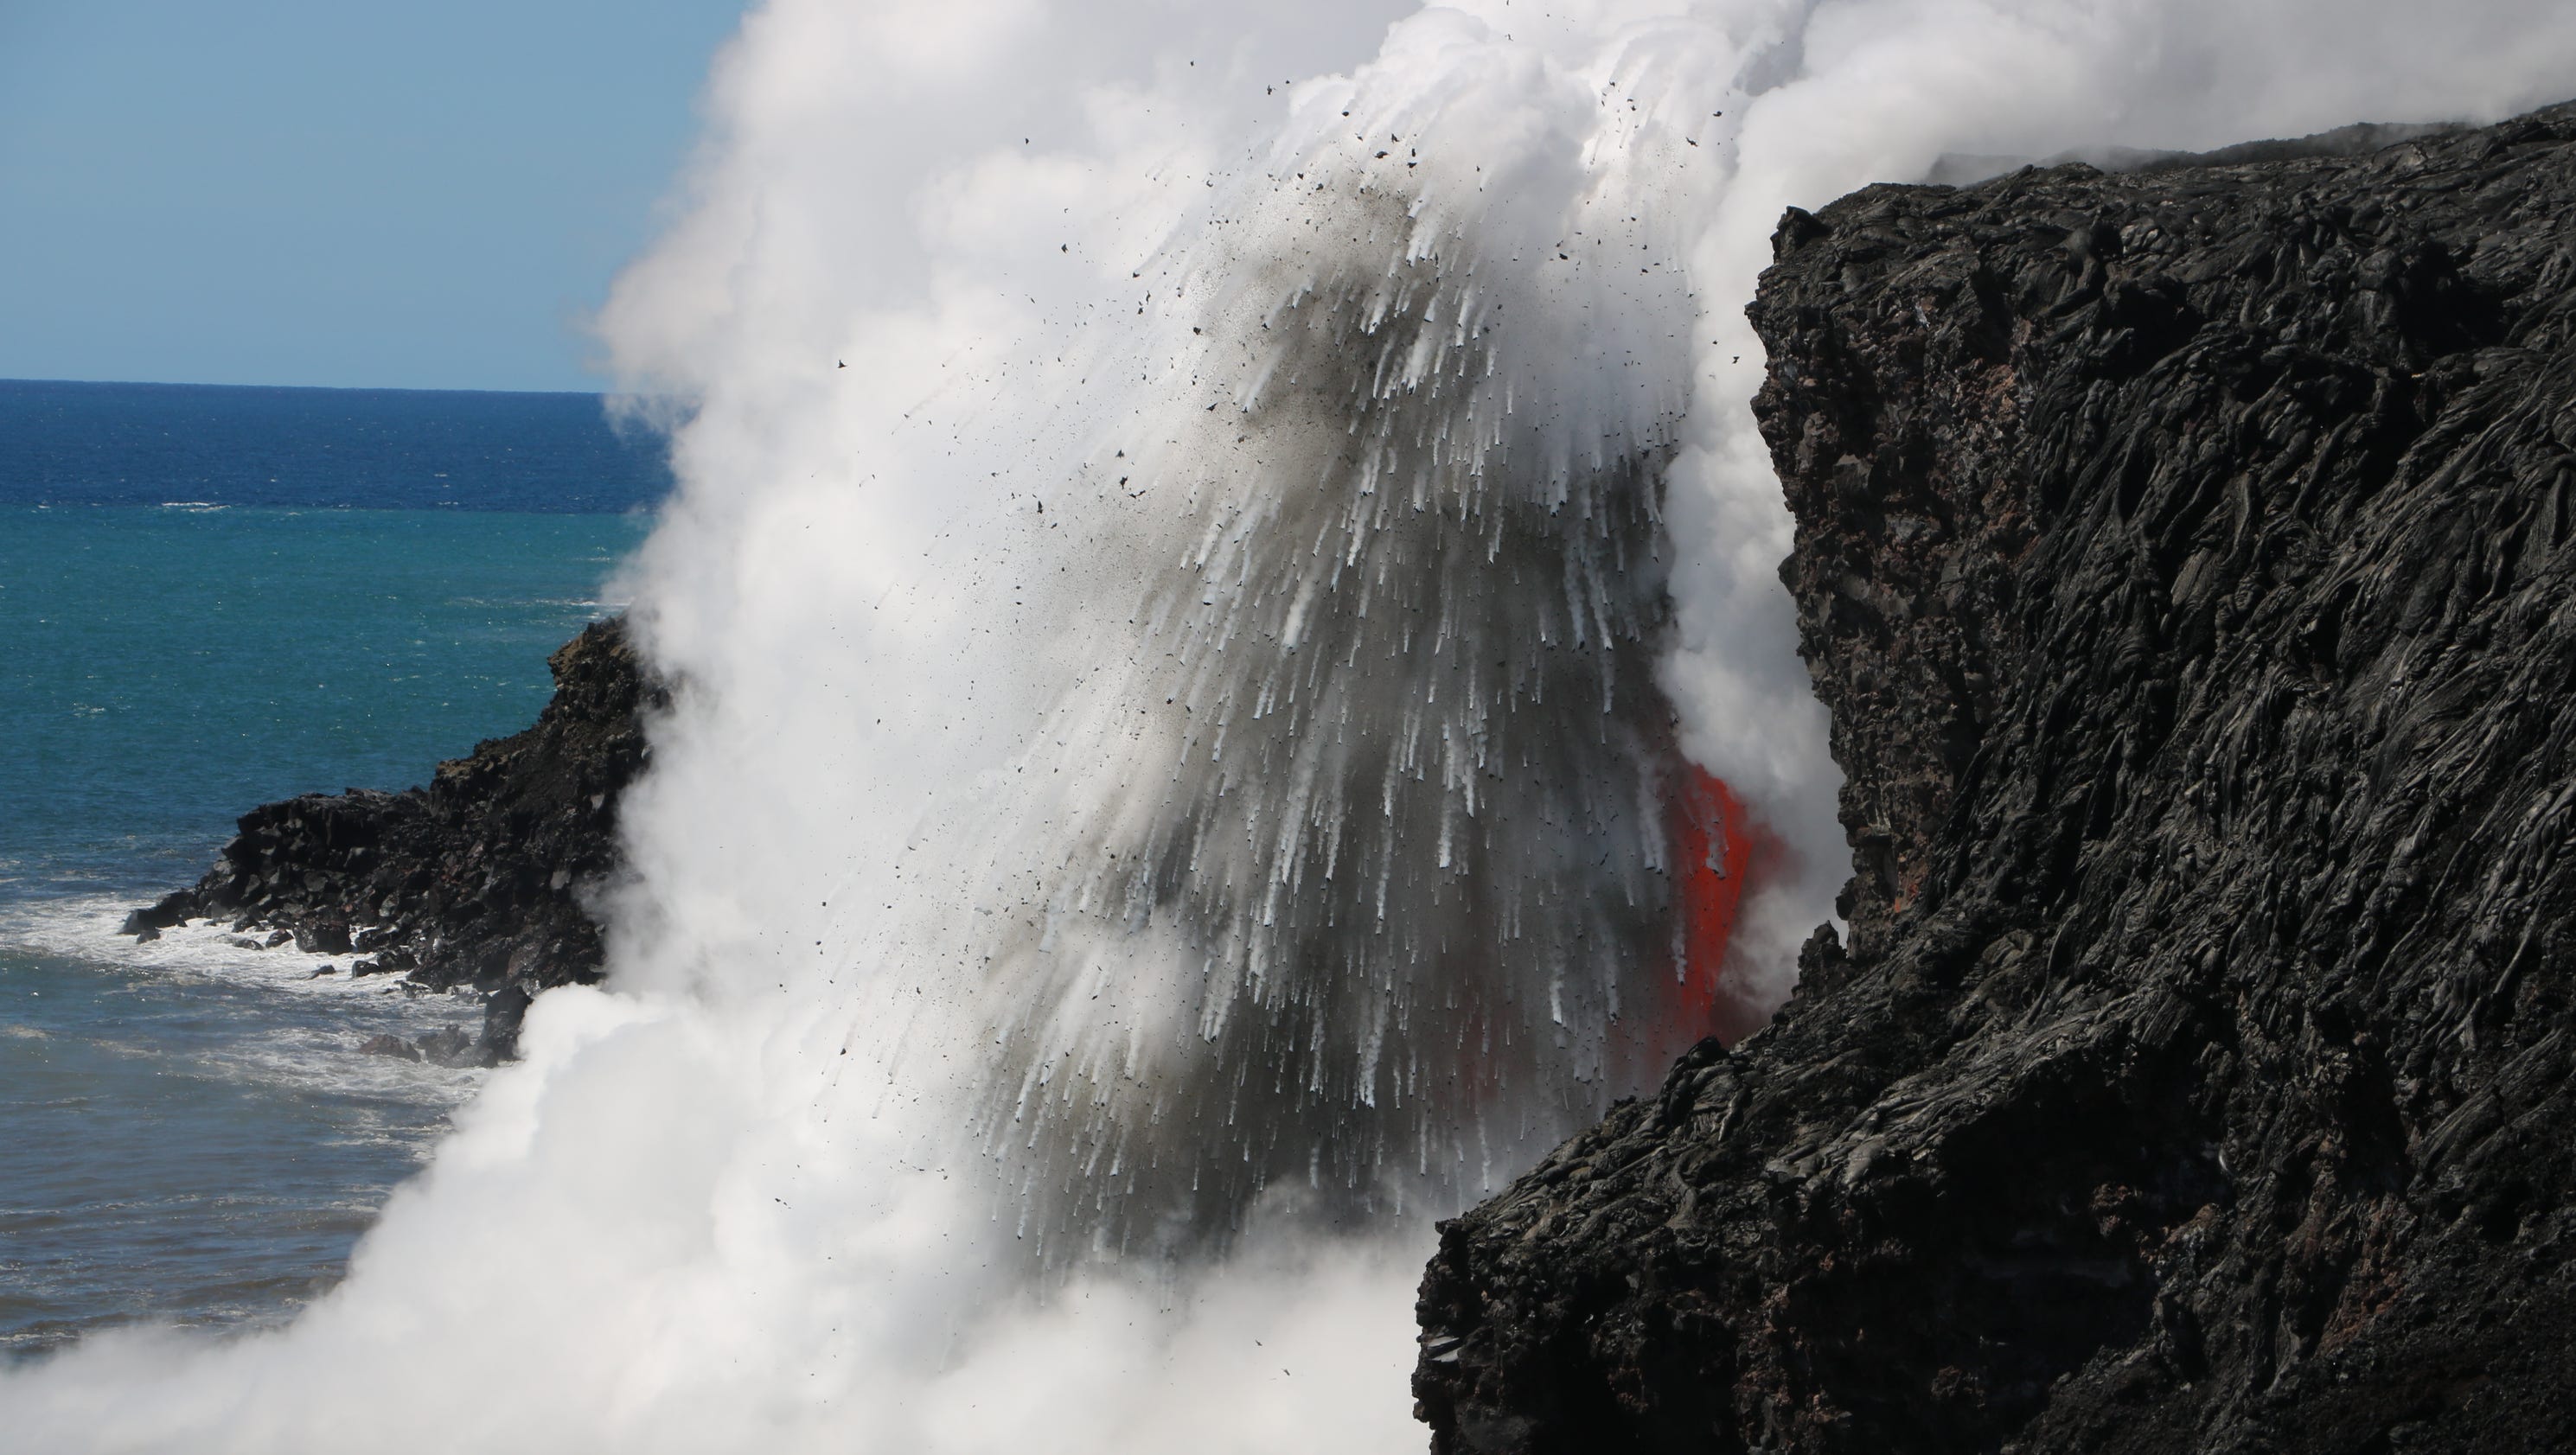 Lava spews off Hawaii into Pacific Ocean, causing explosions3200 x 1680